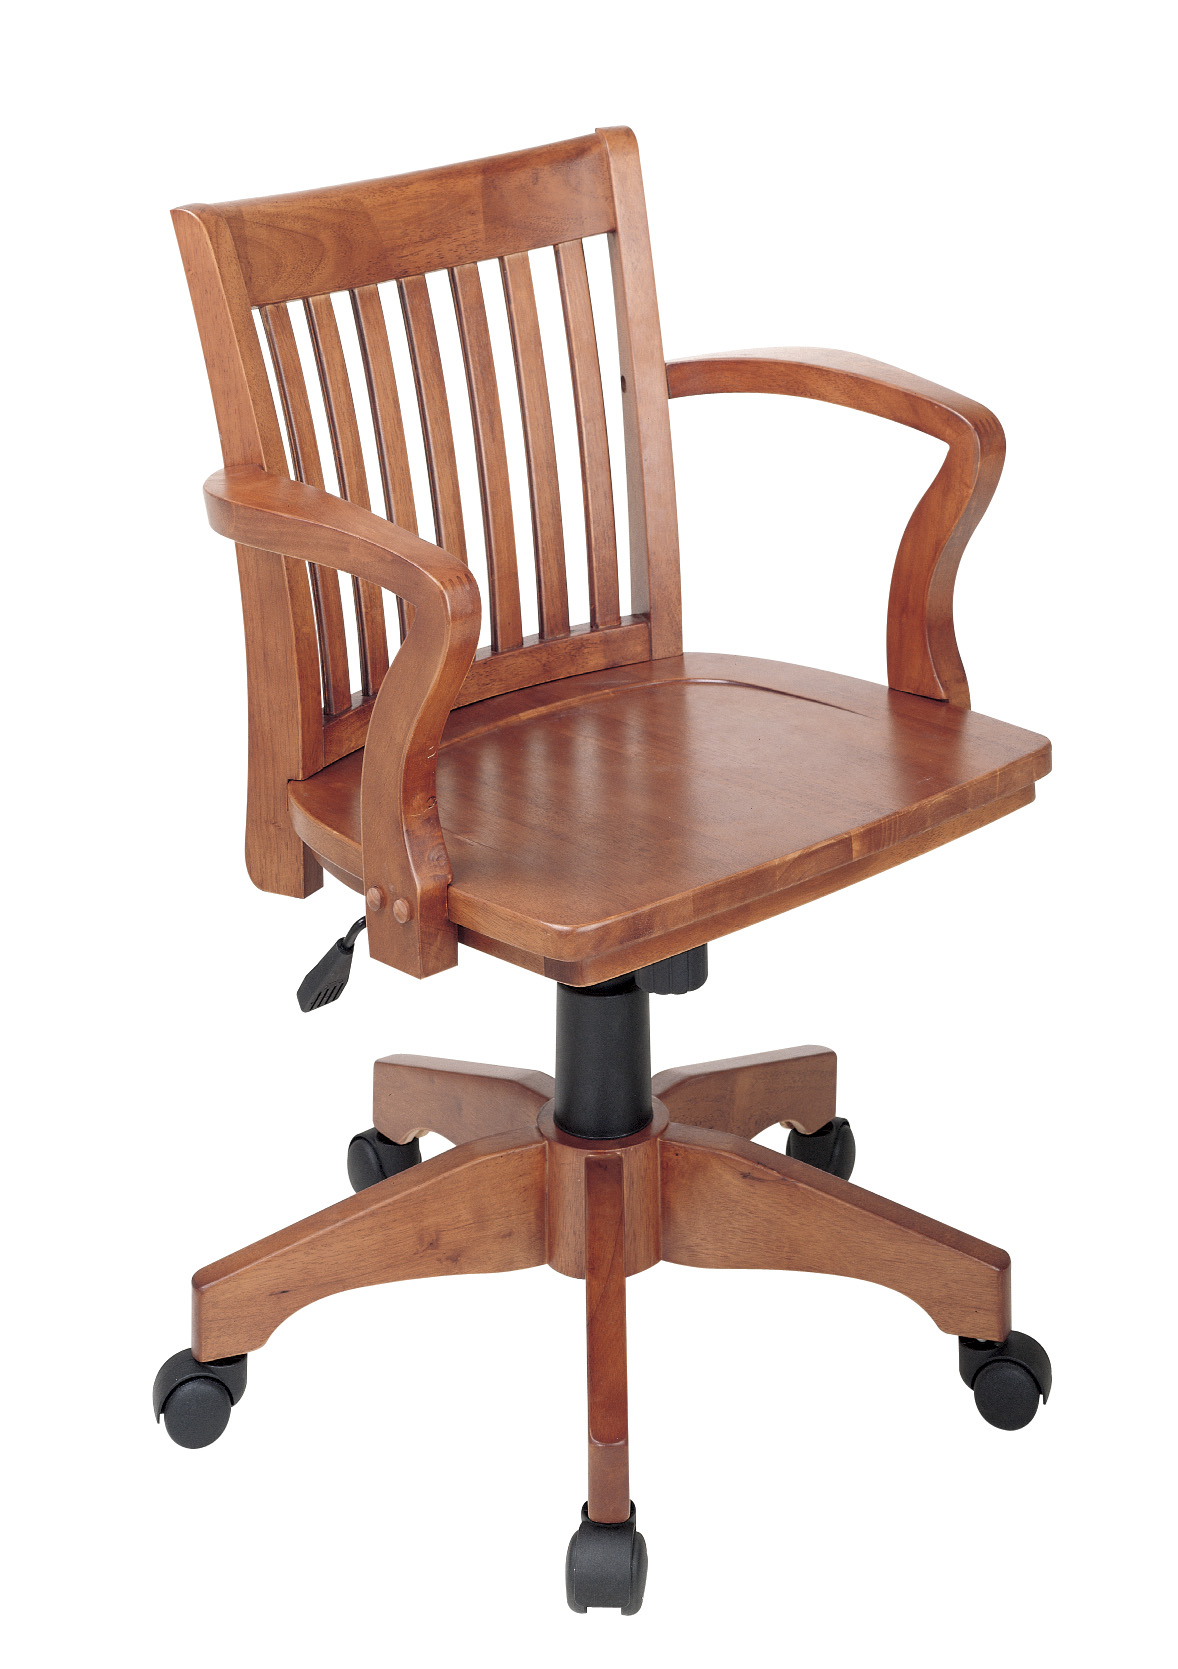 OSP Designs Deluxe Wood Banker's Chair with Wood Seat